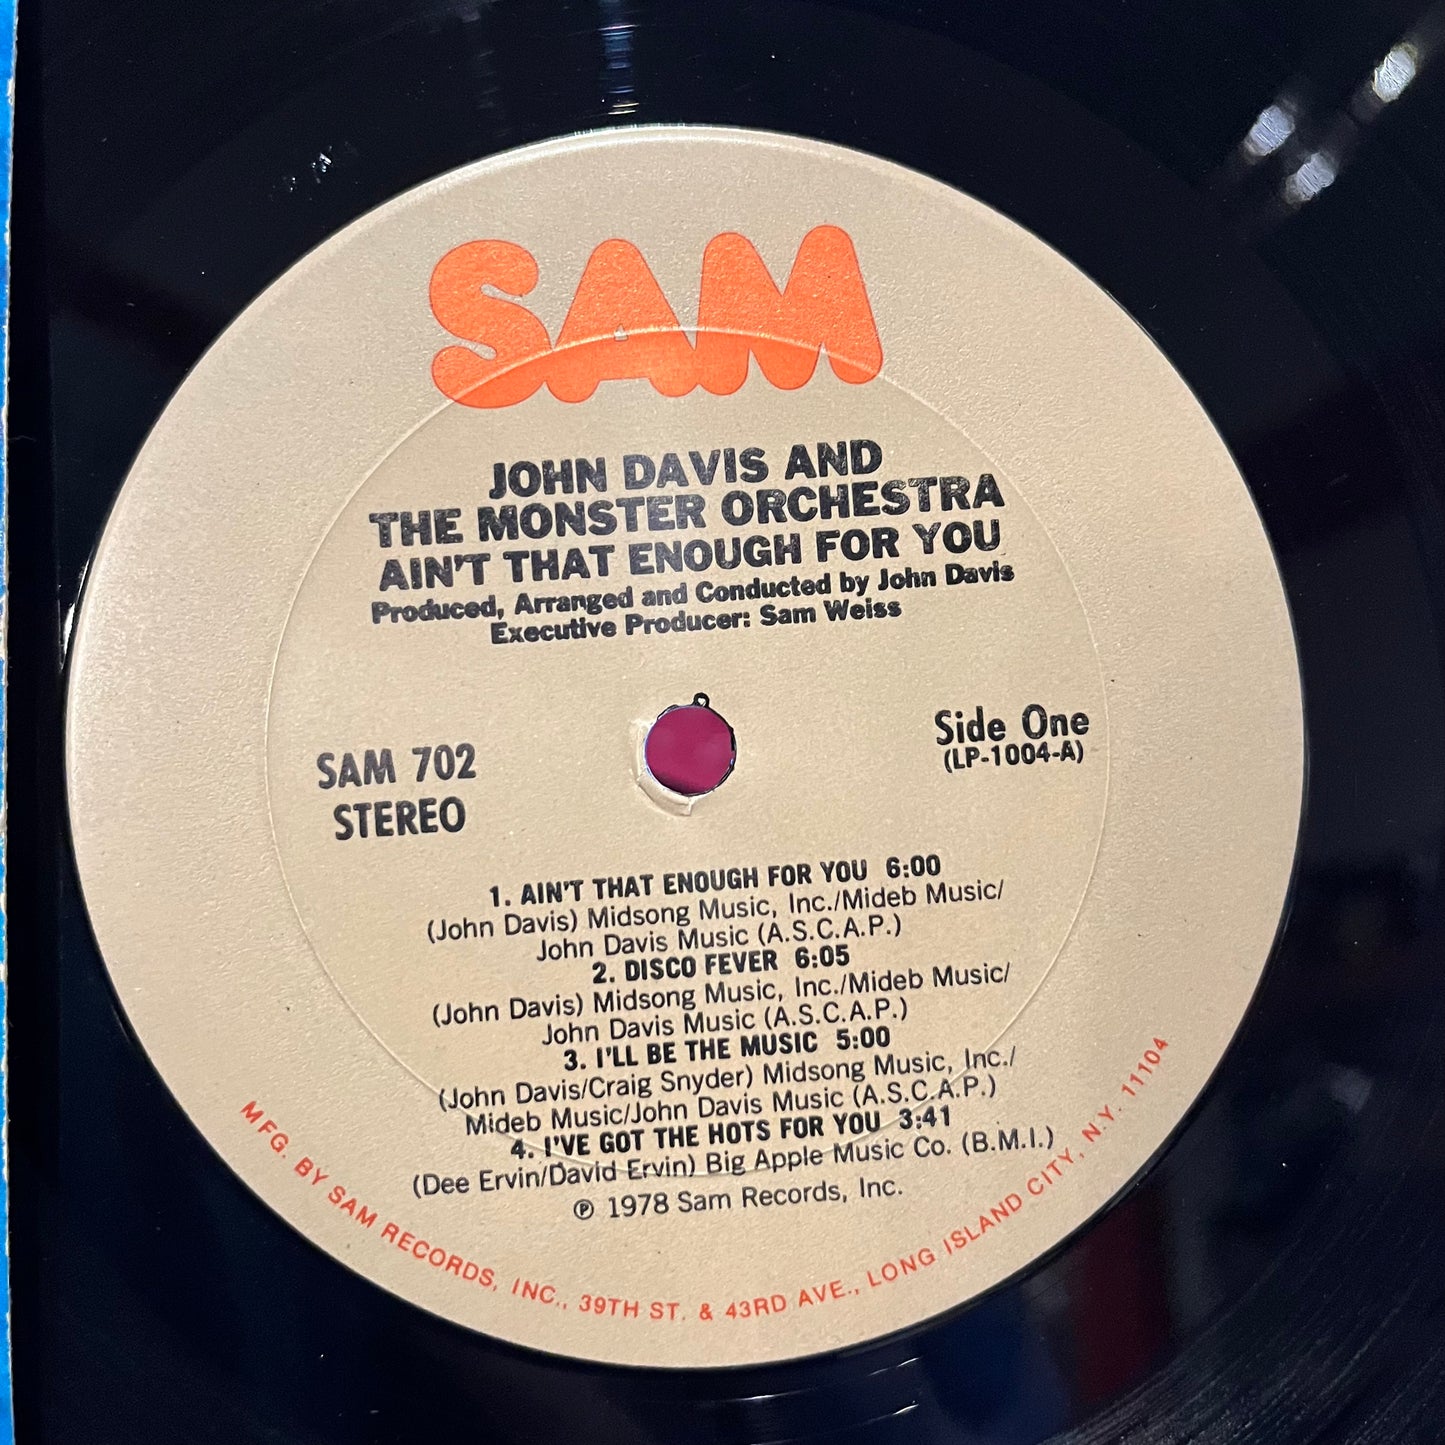 John Davis & The Monster Orchestra Ain't That Enough For You LP Near Mint (NM or M-) Excellent (EX)